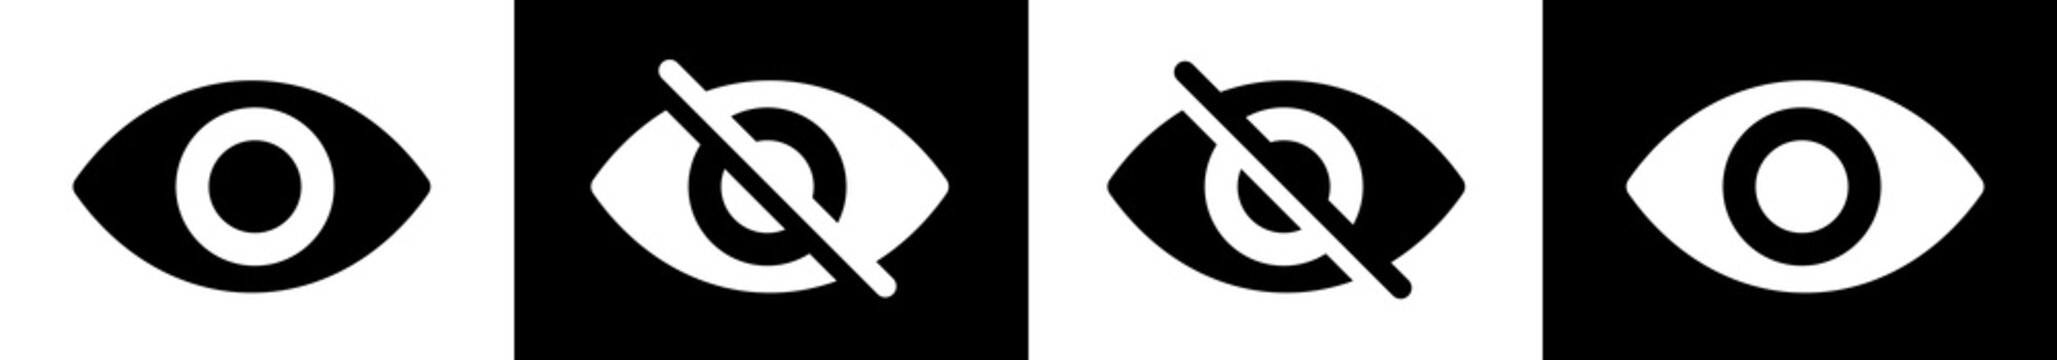 Eye icon. See and unsee eye icon. View and preview icon, vector illustration